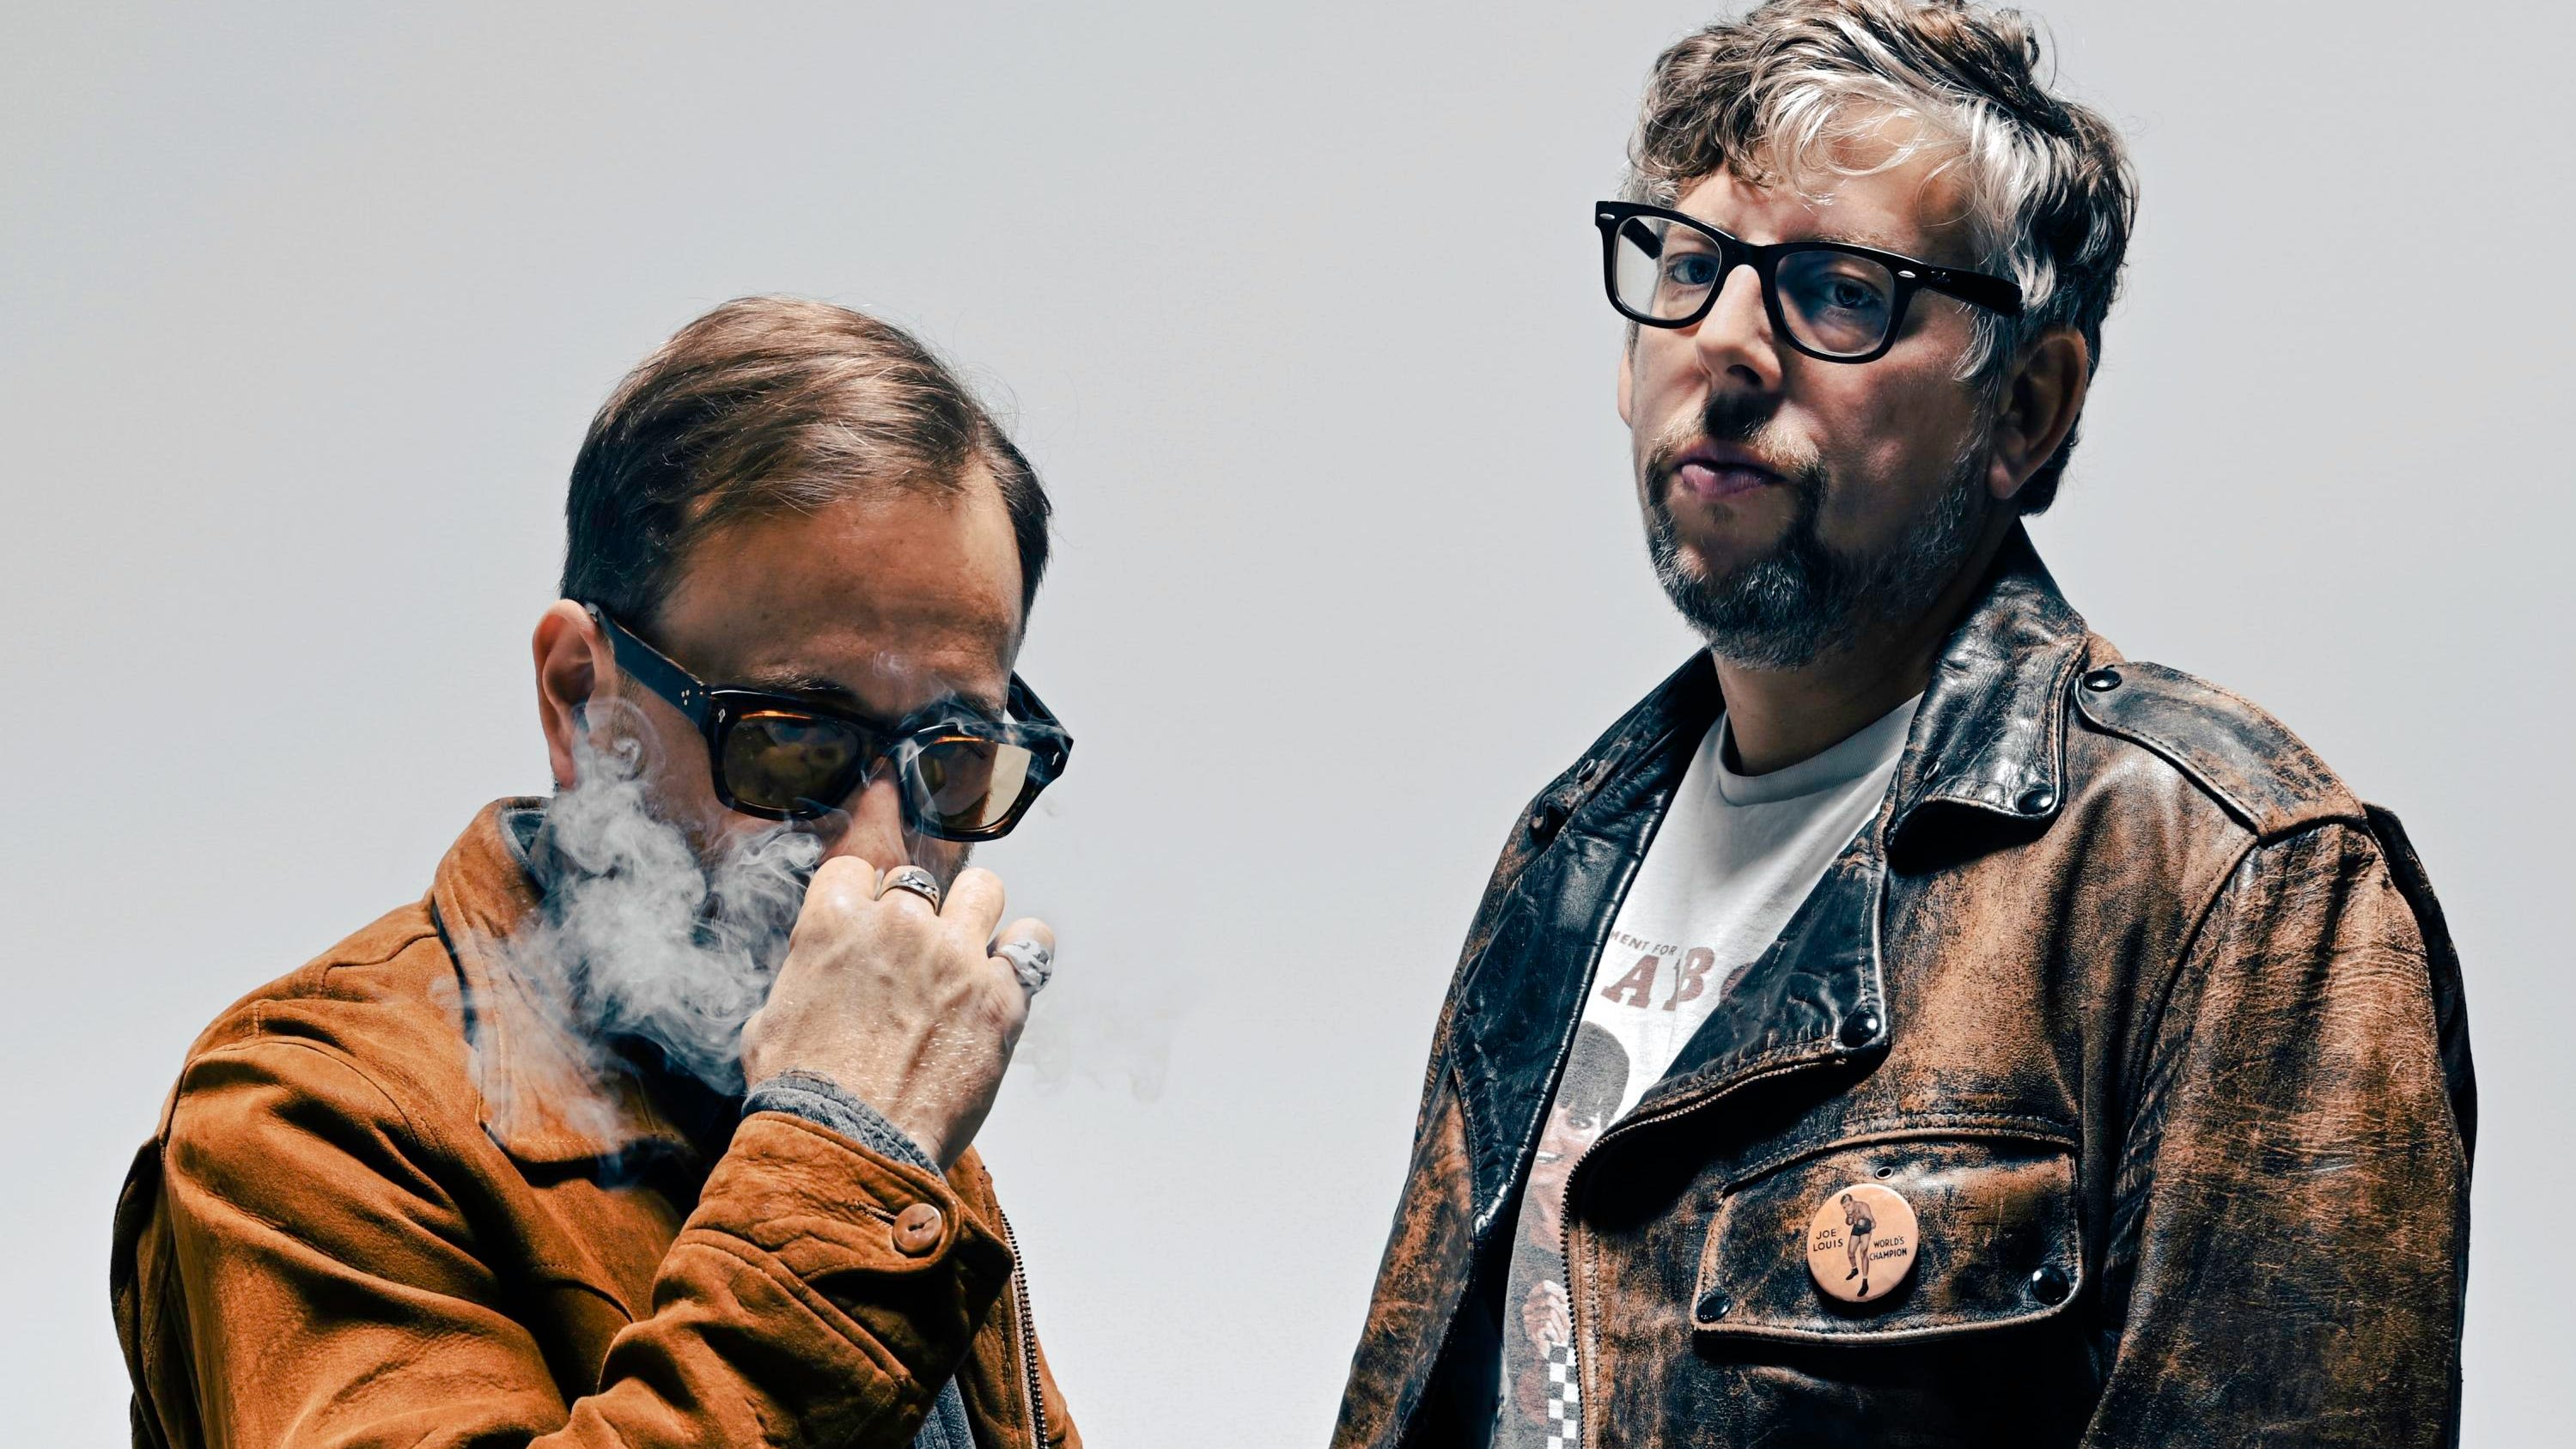 The Black Keys appear to cancel fall U.S. tour, leaving fans wondering what happened